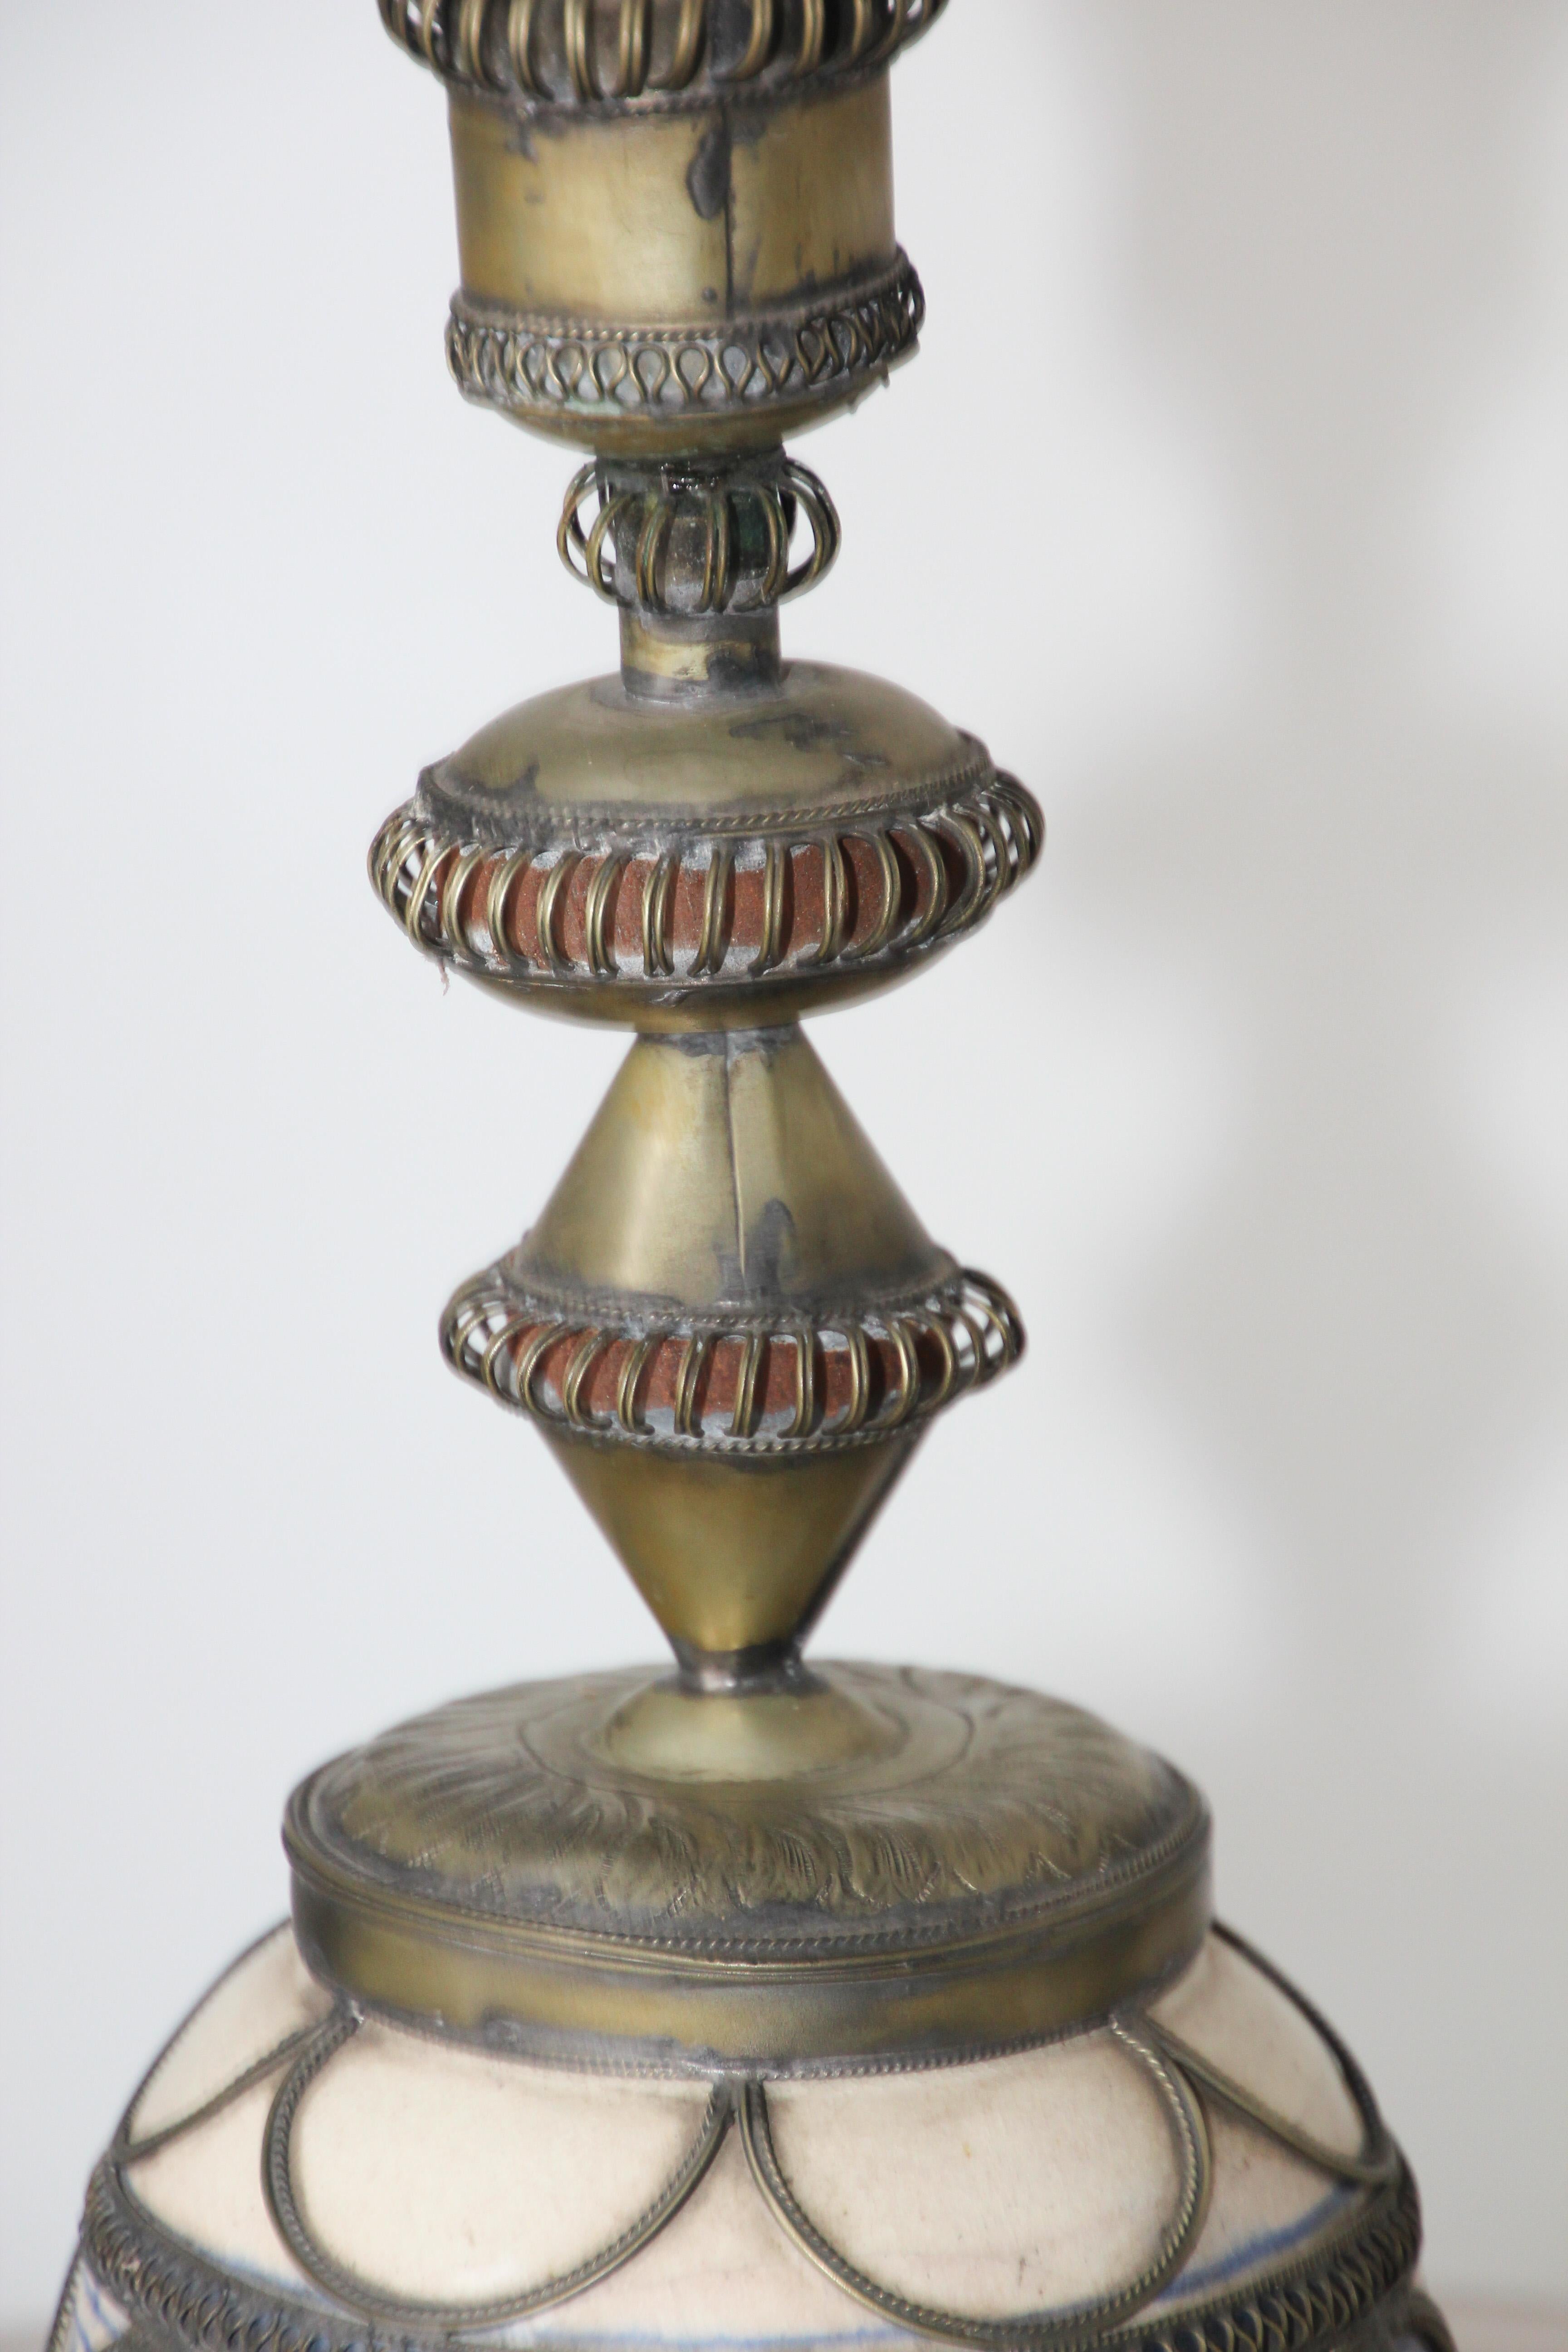 Moorish Moroccan Ceramic Candlestick from Fez with Silver Filigree 1